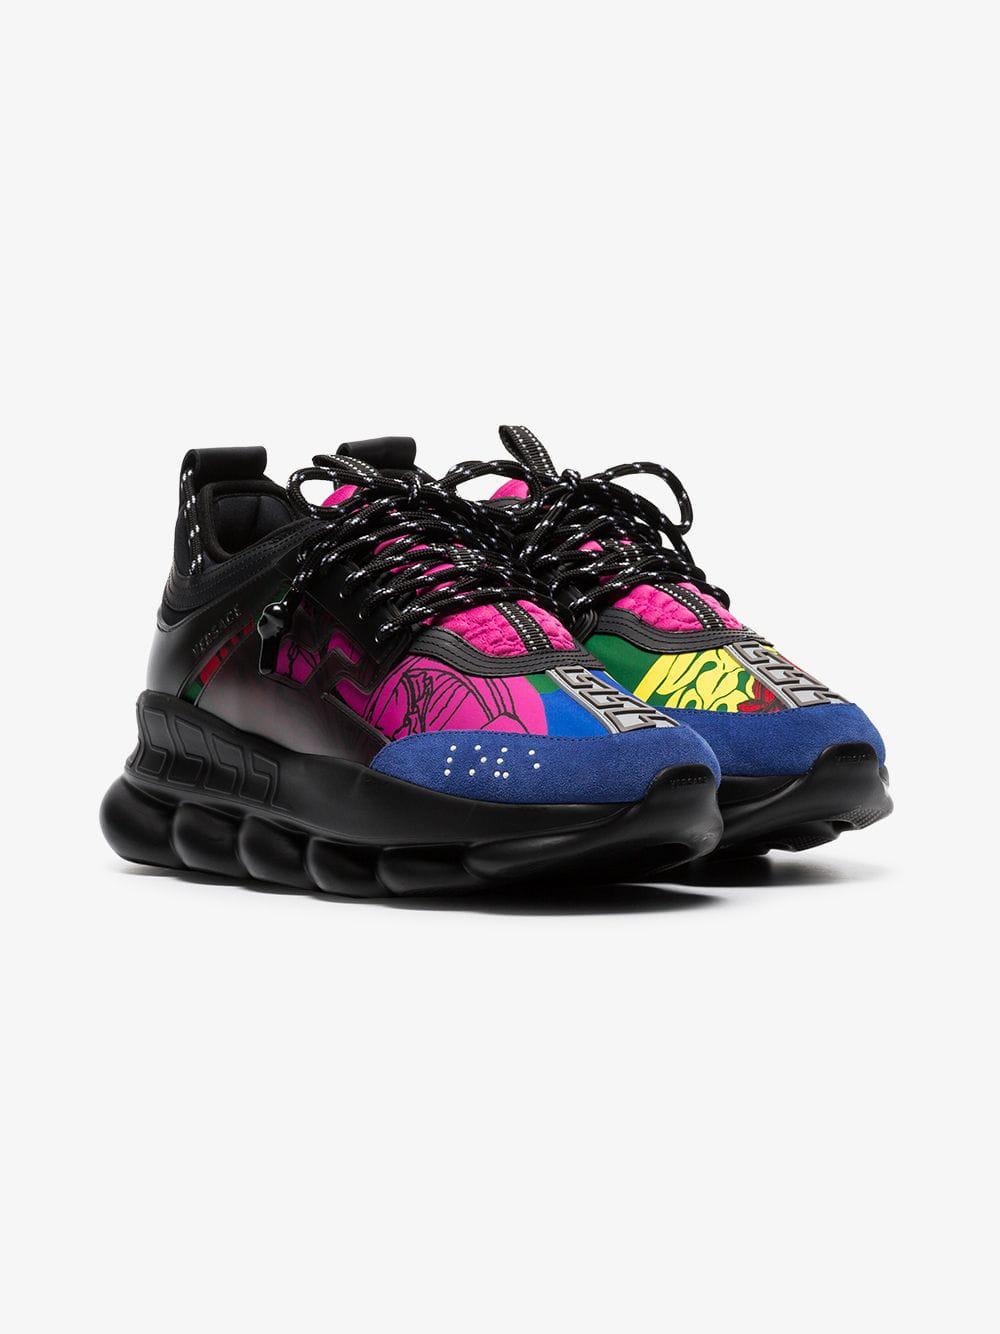 Versace Synthetic Black And Multicoloured Chain Reaction Sneakers 